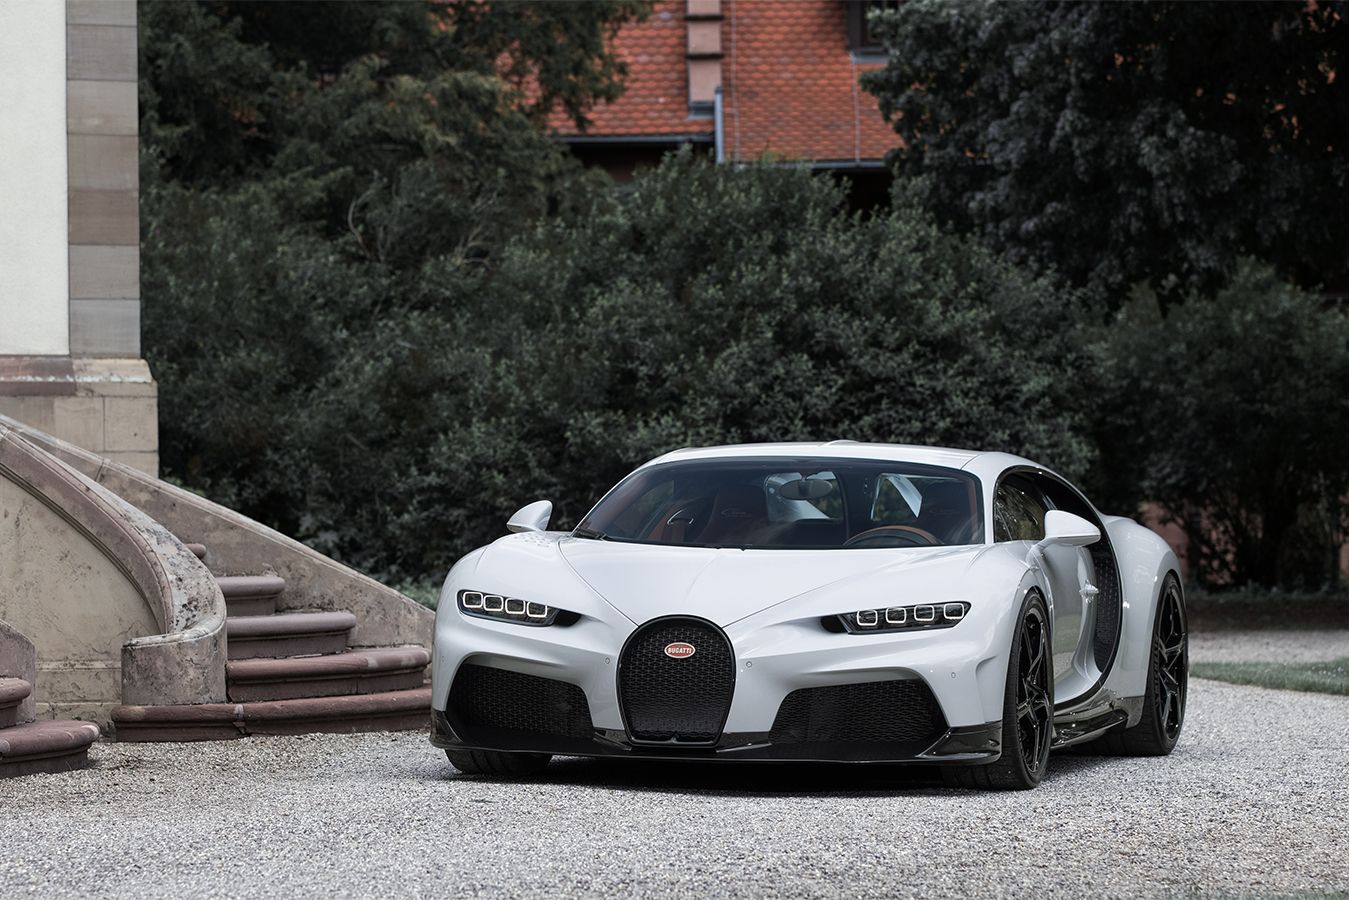 Check Out This New Bugatti Chiron Sport Finished In 'Petrol Blue